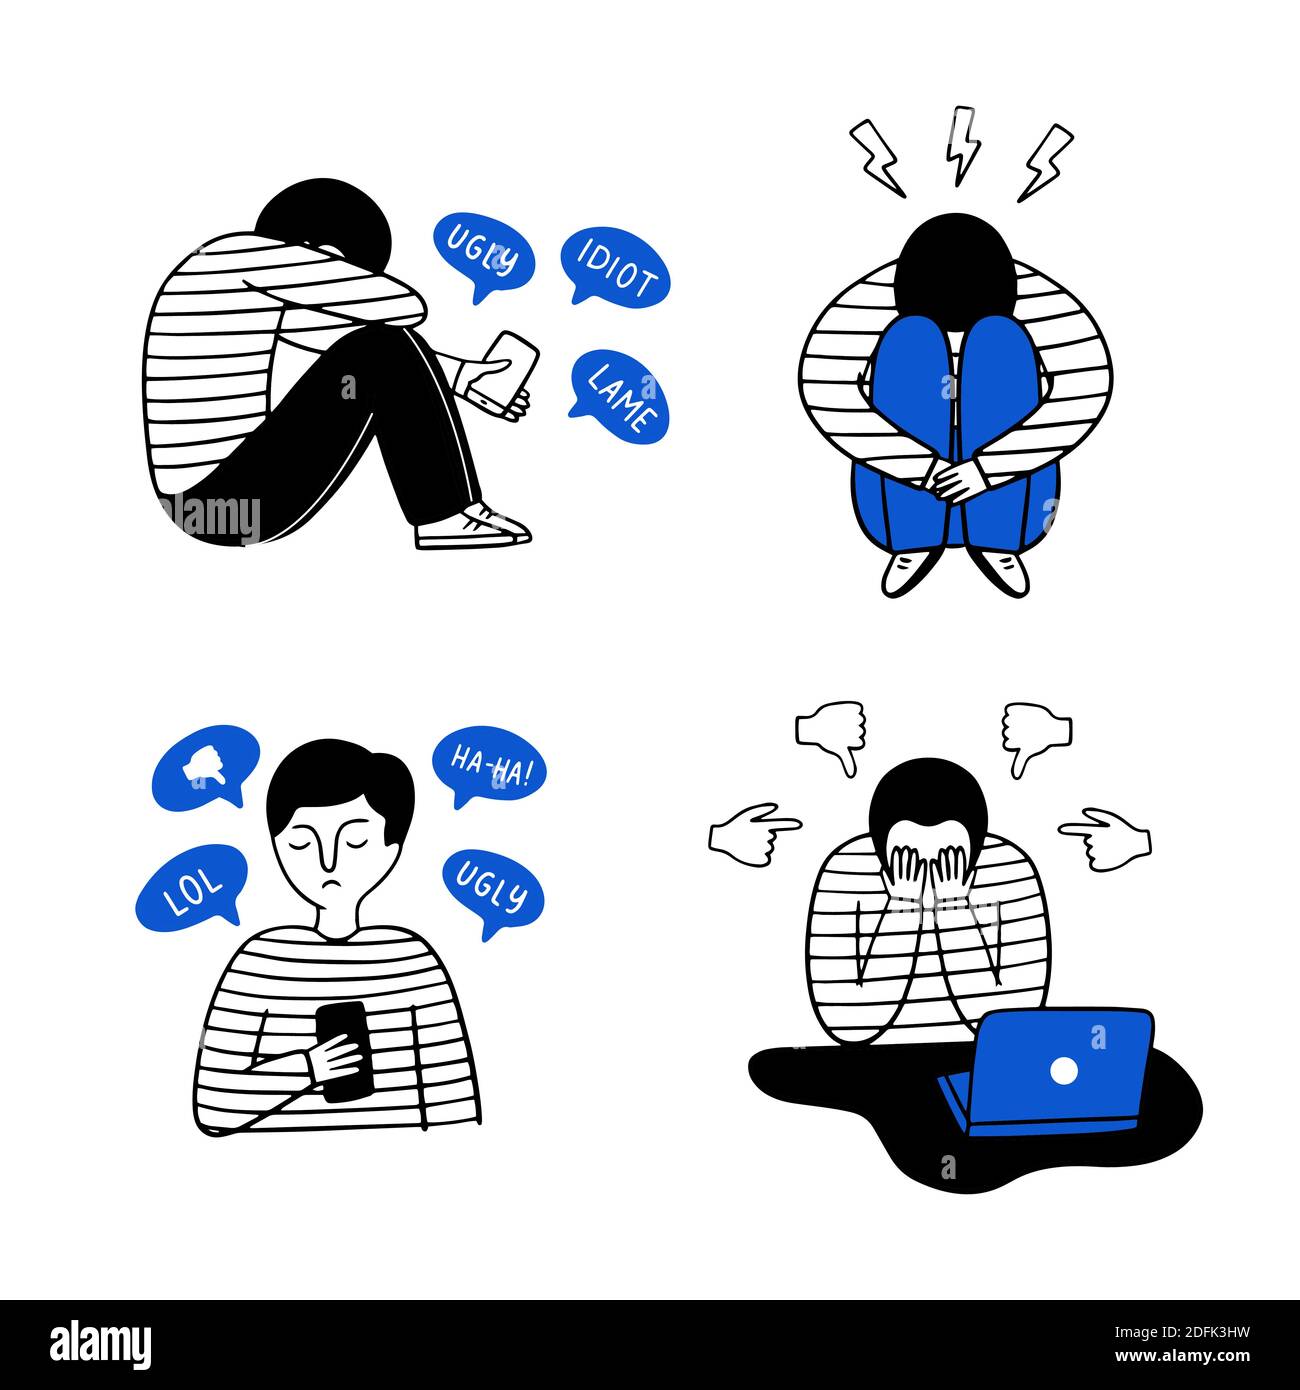 Cyberbullying theme with a sad guy. Internet abuse. Vector doodle illustration. Stock Vector